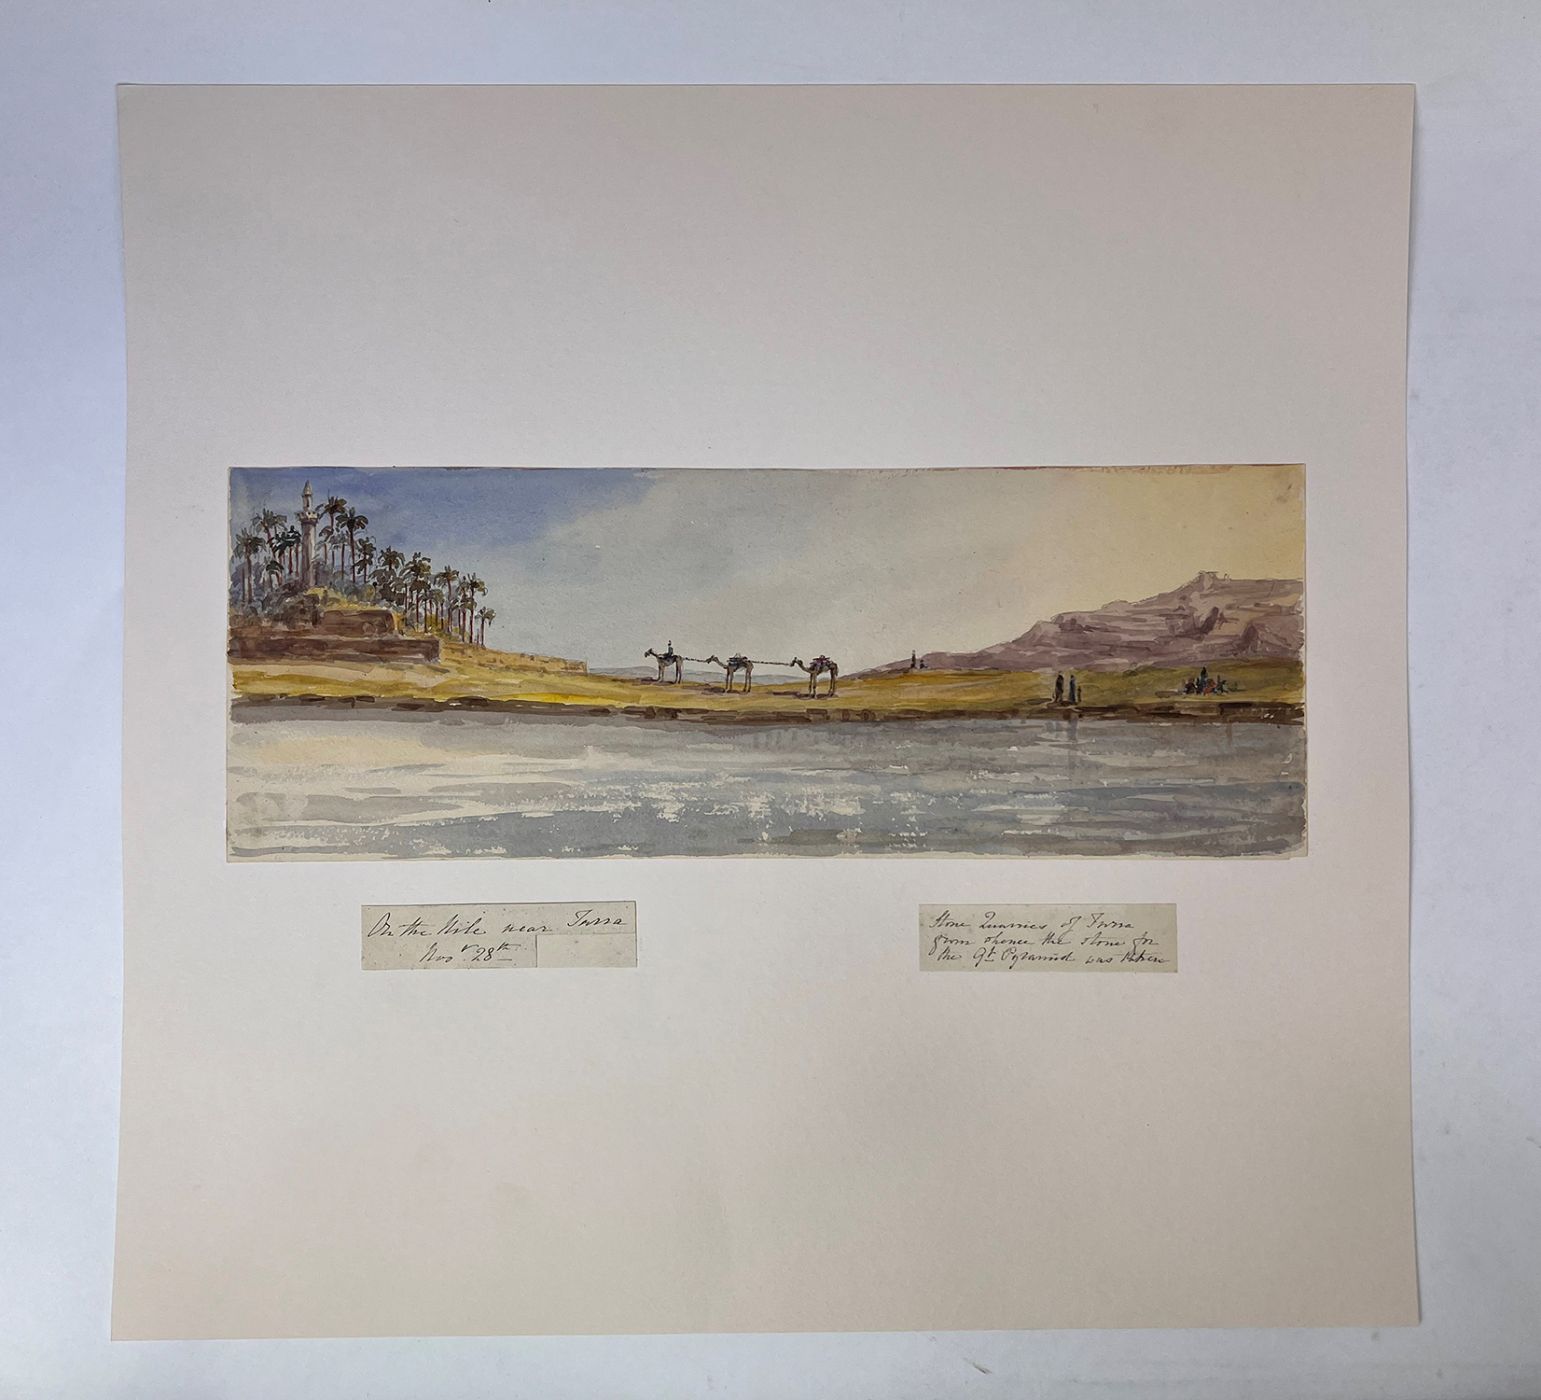 A FINE COLLECTION OF TWENTY-SEVEN EARLY WATERCOLOUR VIEWS OF THE NILE, PRODUCED DURING A WINTER CRUISE IN 1864-65, DEPICTING THE ANCIENT SITES AND LANDSCAPES OF UPPER EGYPT, NUBIA, AND THE SECOND CATARACT -  image 1